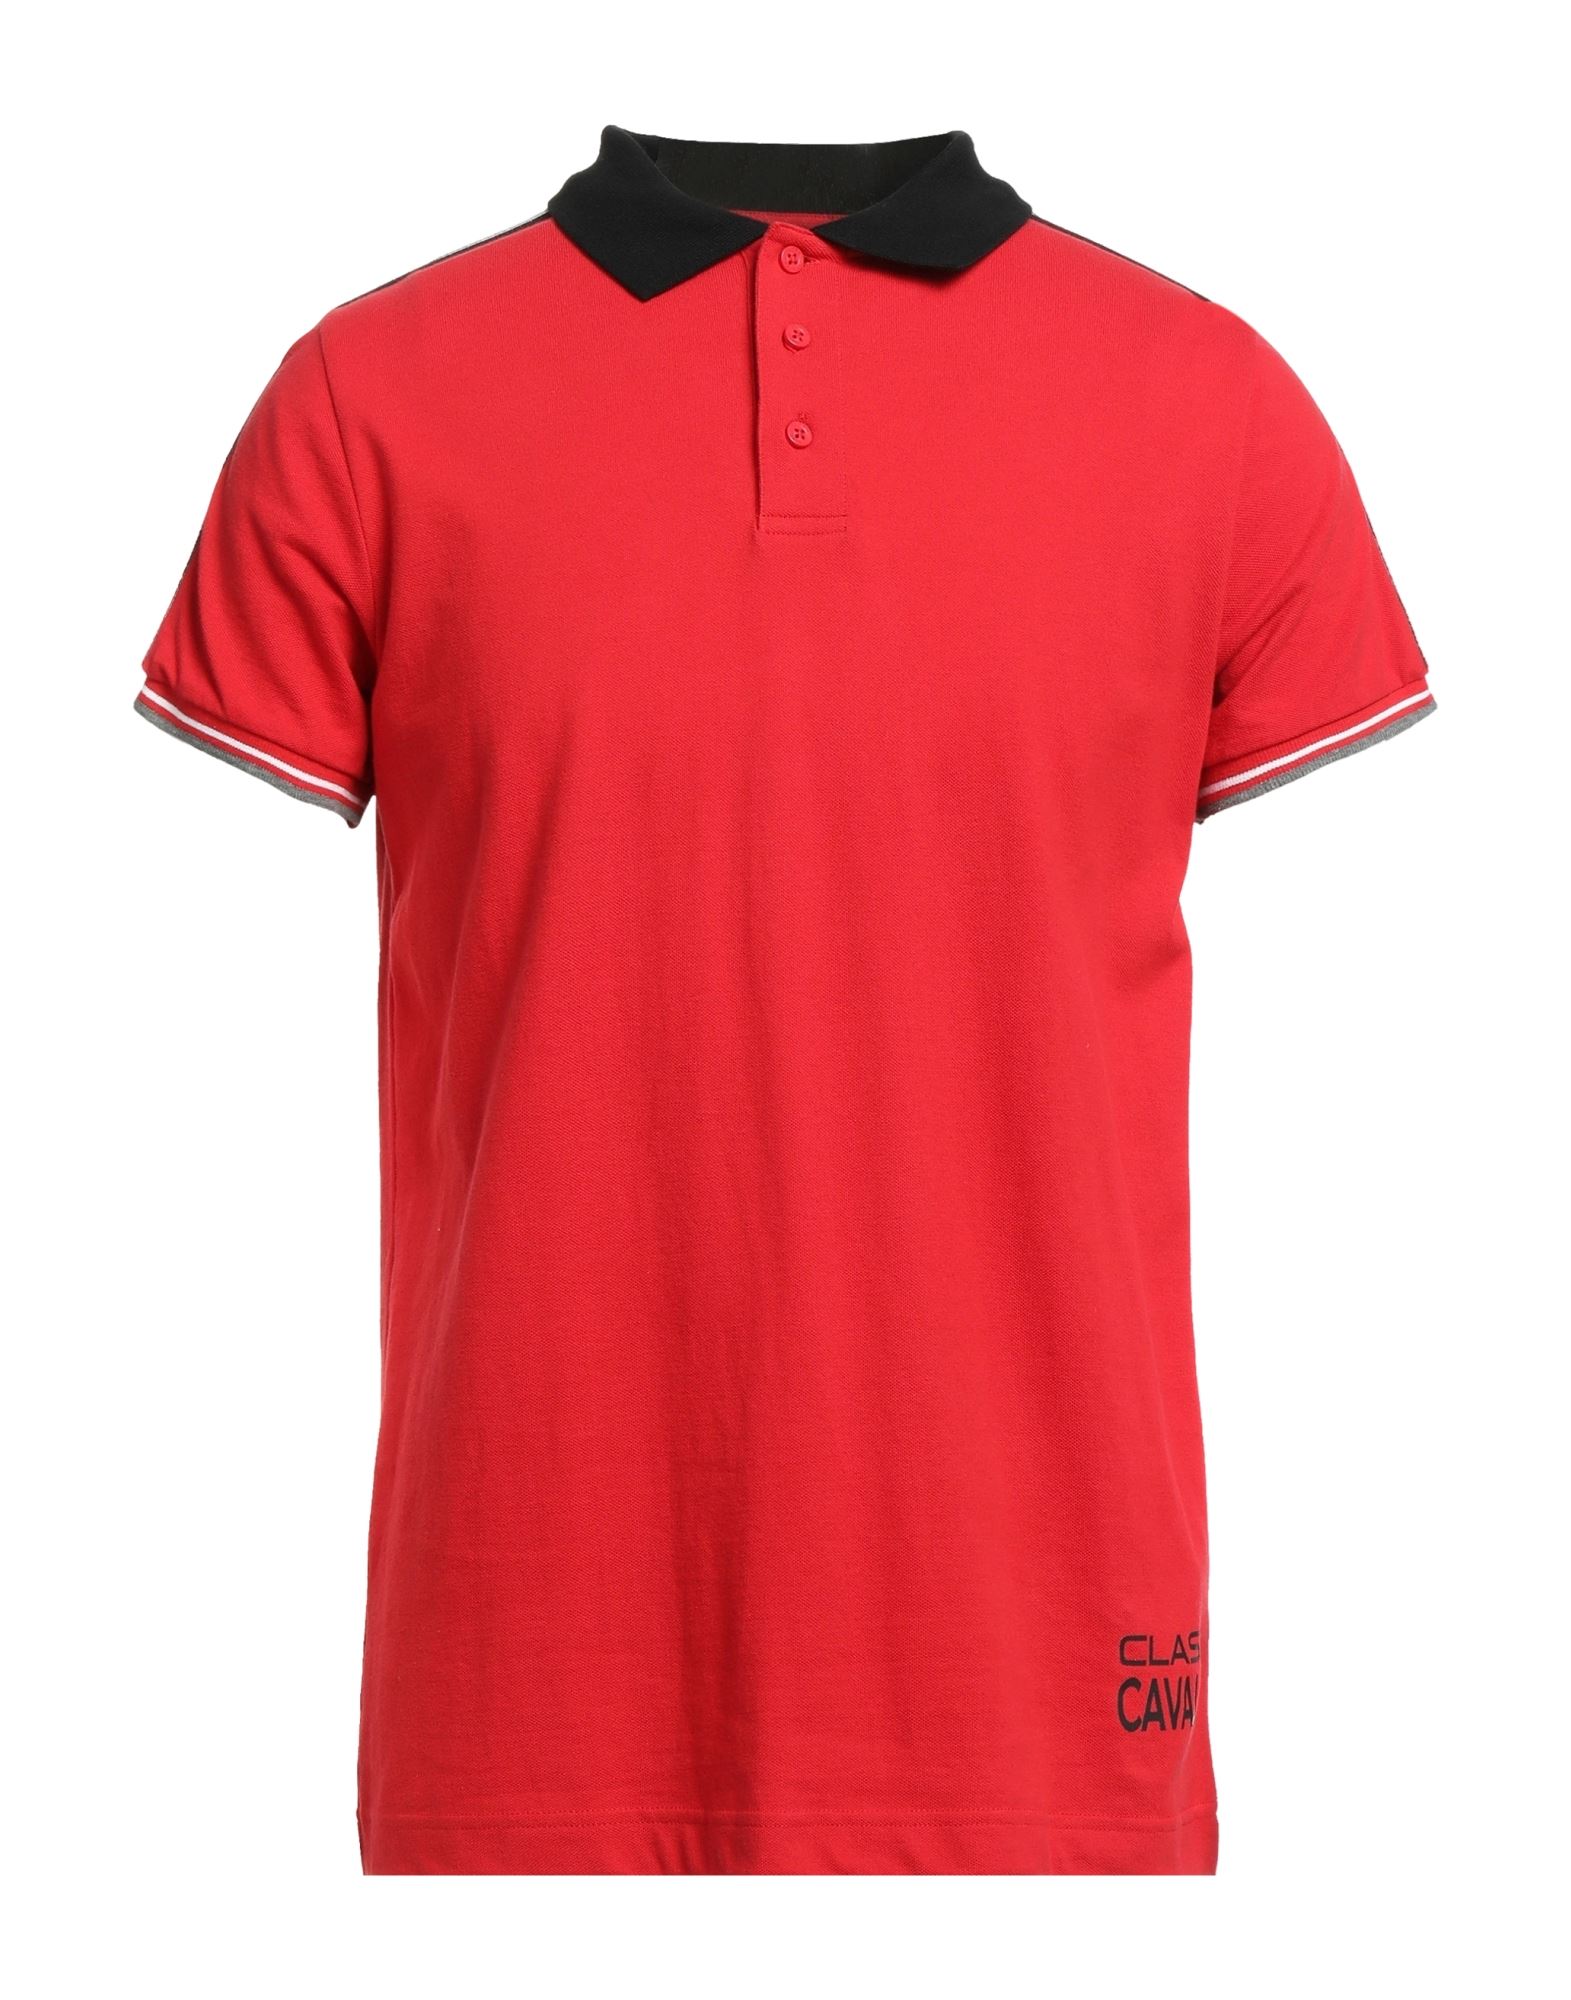 Cavalli Class Polo Shirts In Red